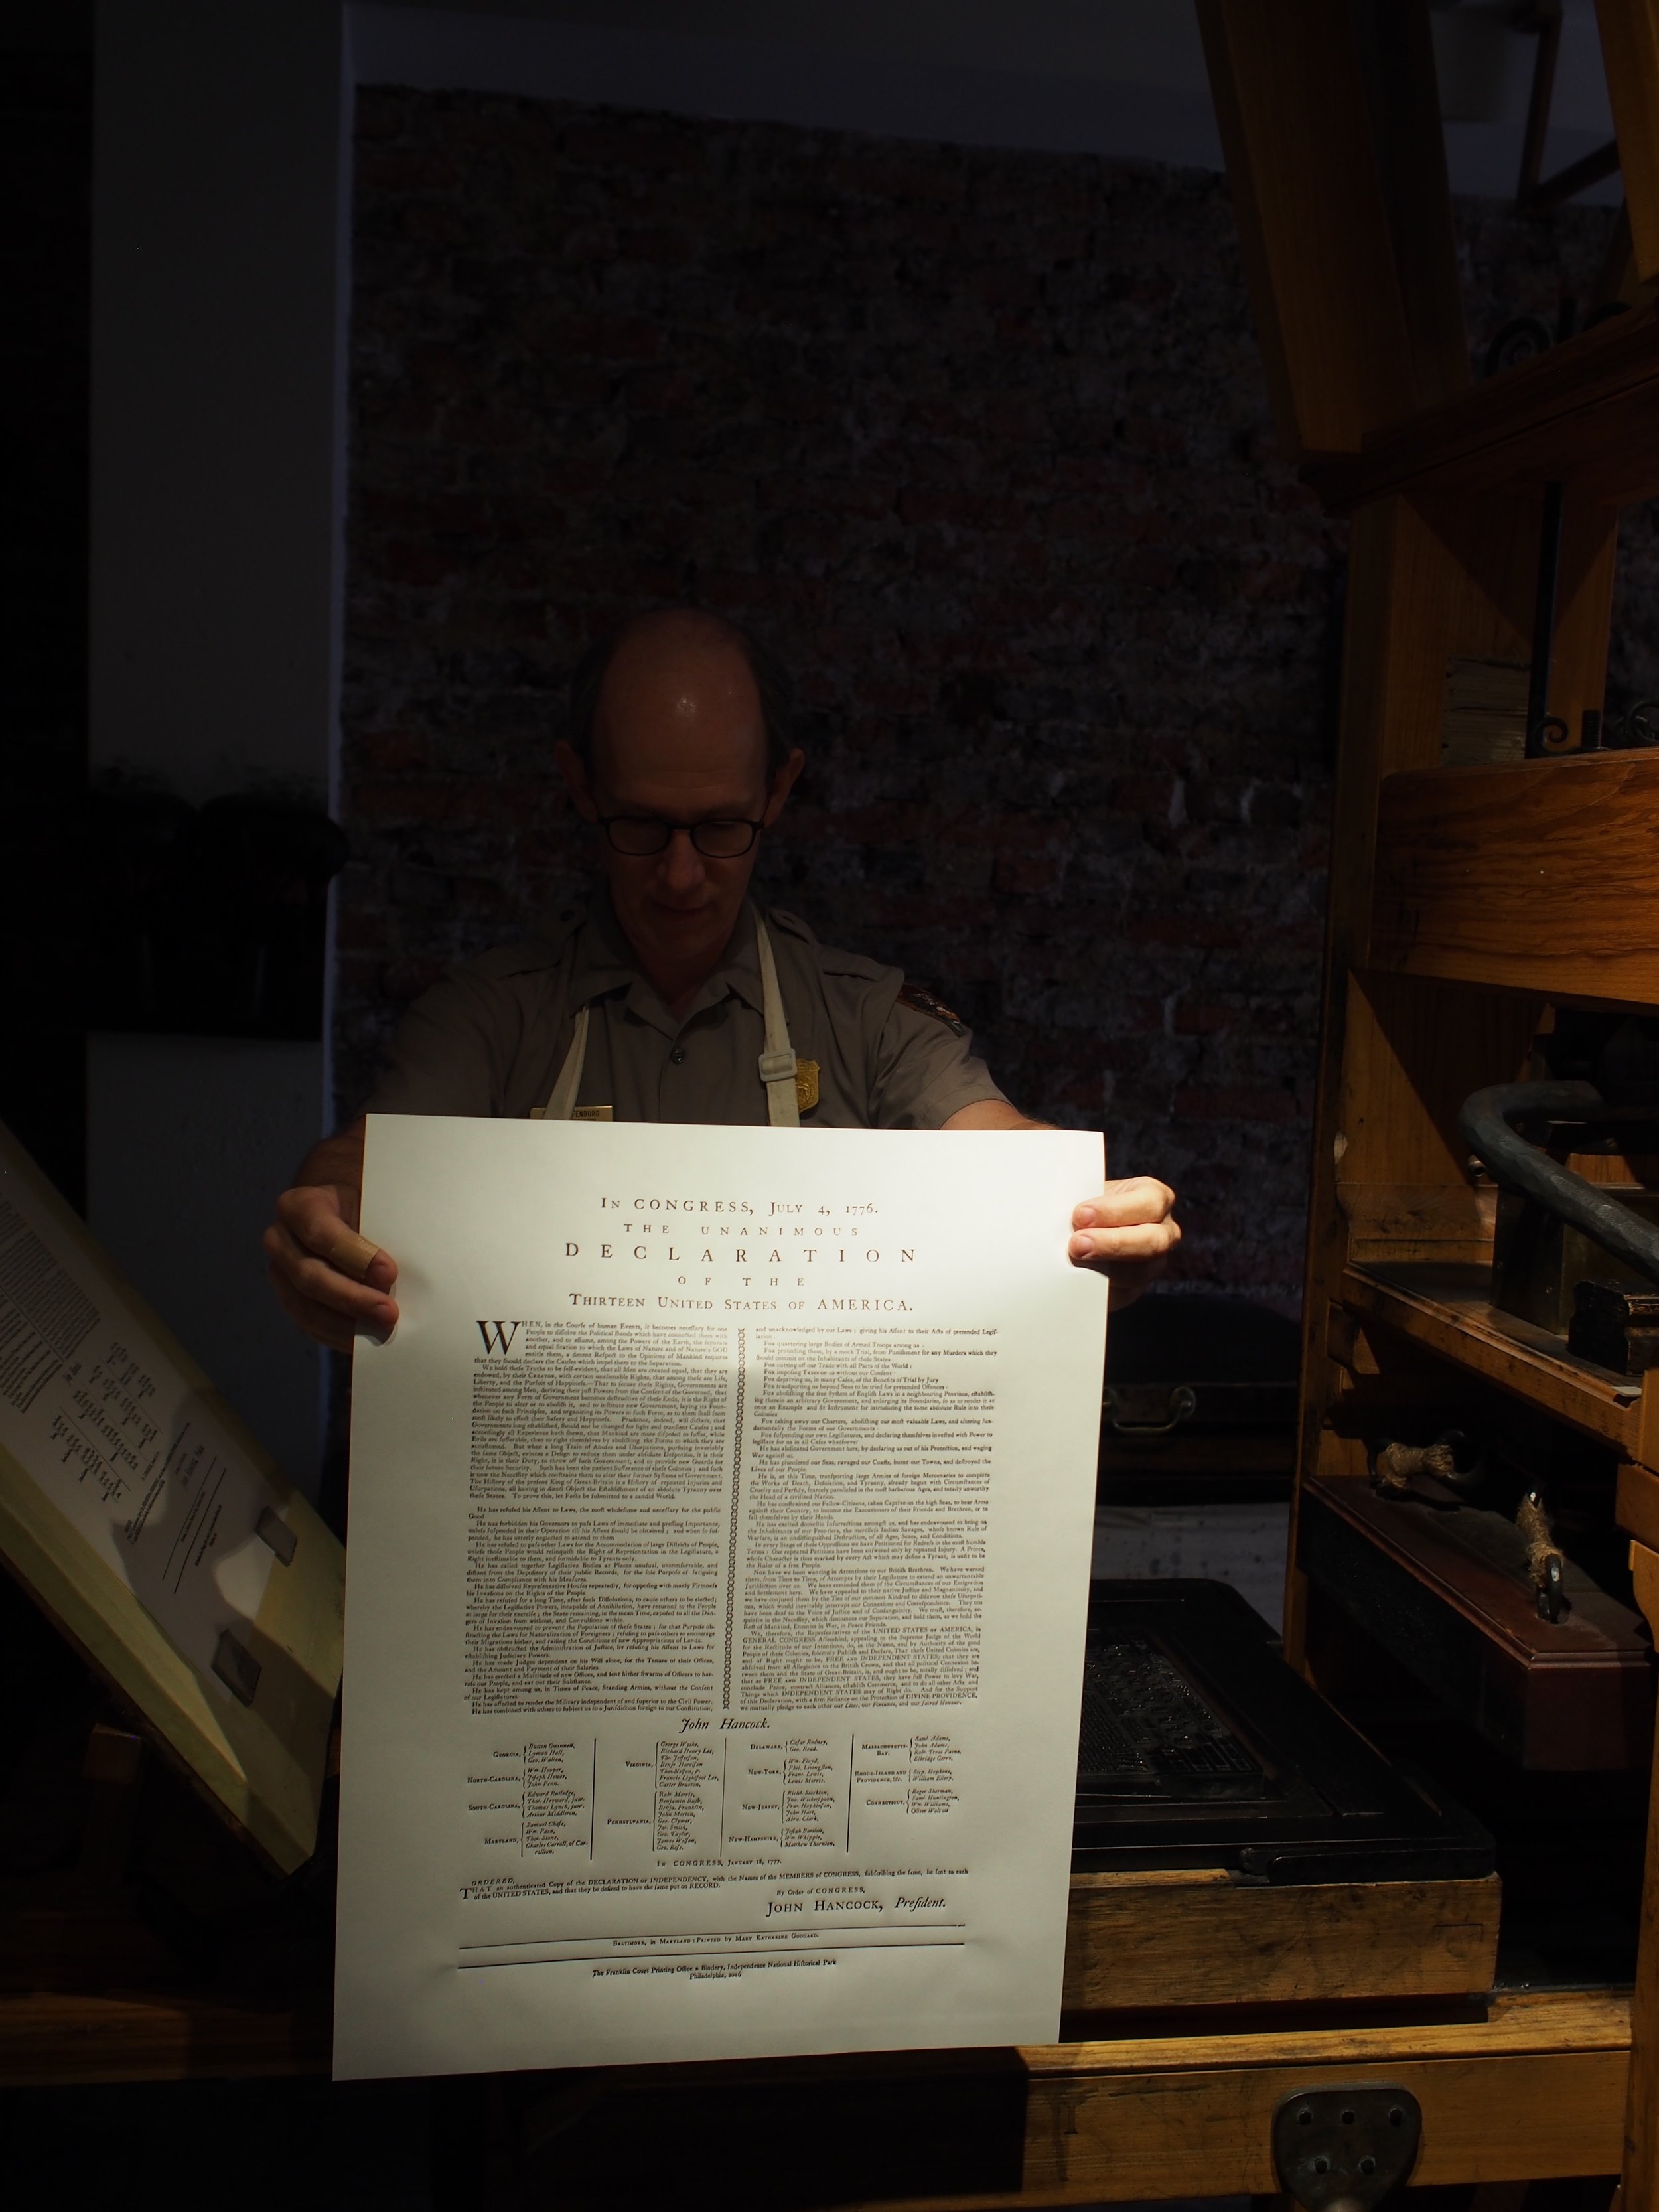 Closer look at the printed sheet:  it's the Declaration of Independence